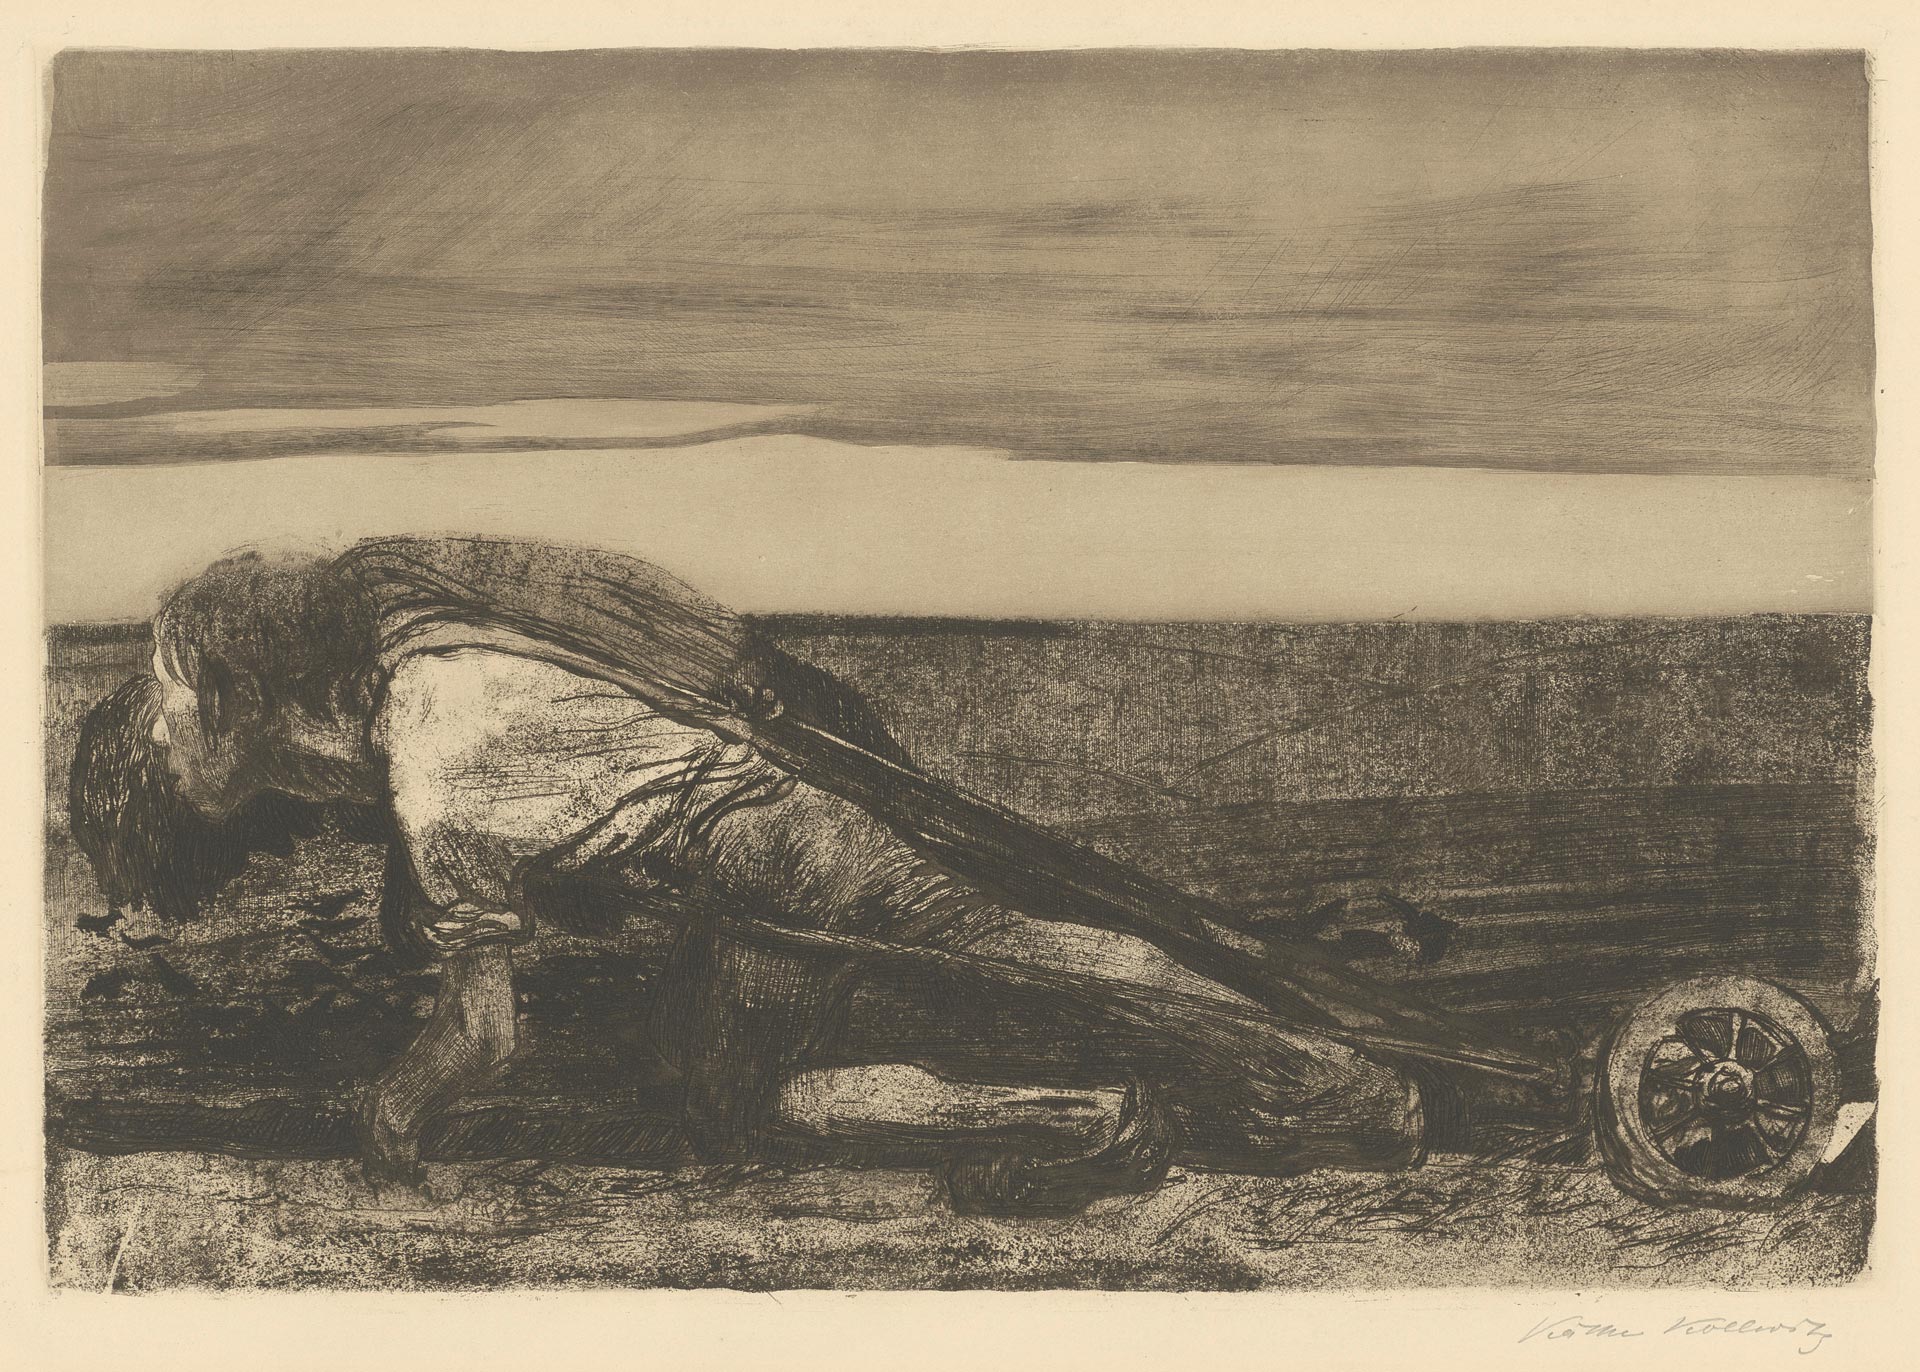 Käthe Kollwitz, The Ploughmen, sheet 1 of the cycle »Peasants War«, 1907, line etching, drypoint, aquatint, reservage, sandpaper, needle bundle and soft ground with imprint of Ziegler's transfer paper, Kn 99 VIII b, Cologne Kollwitz Collection © Käthe Kollwitz Museum Köln